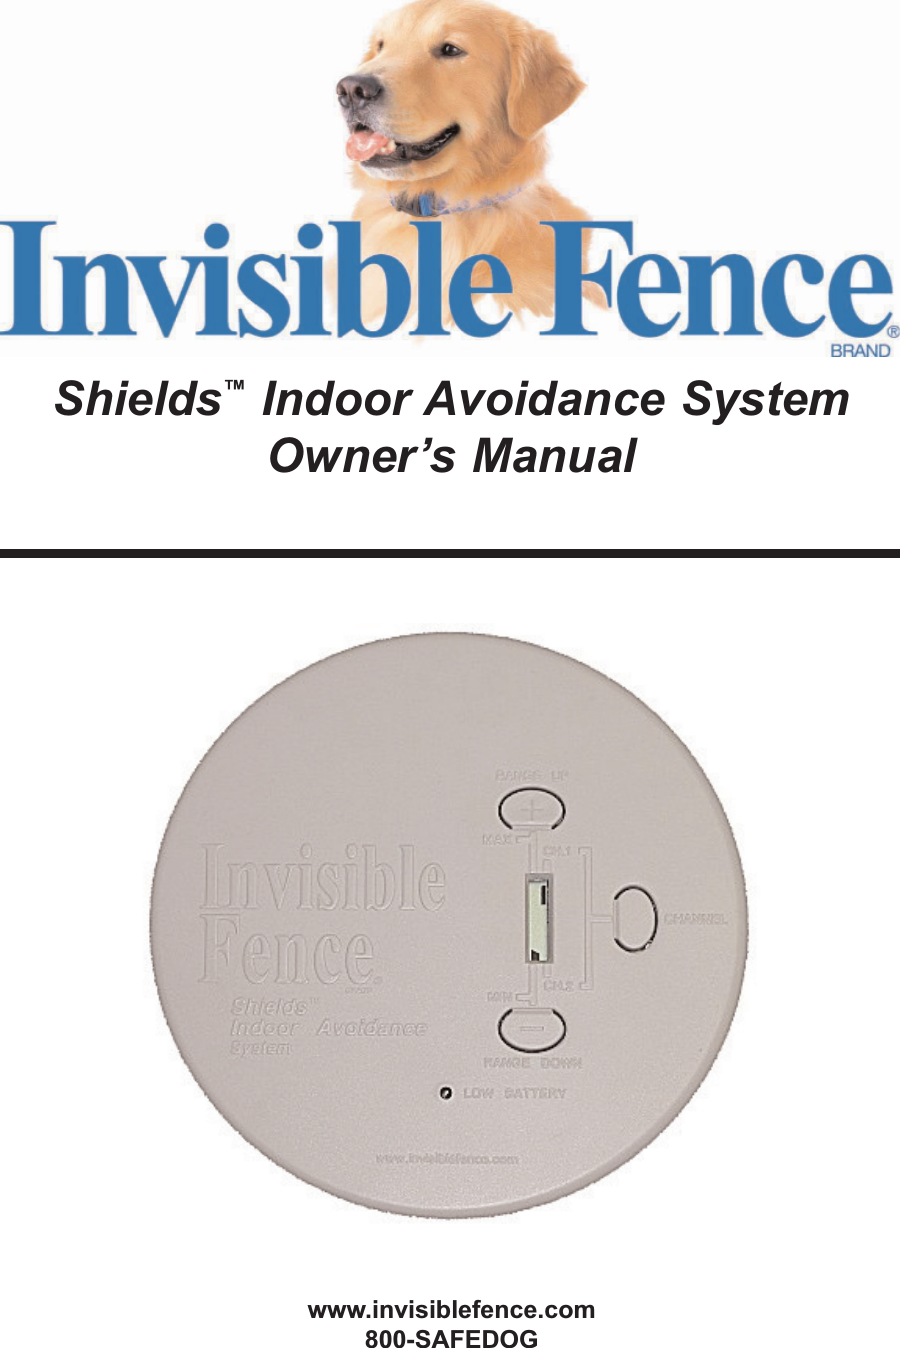 Shields™Indoor Avoidance System Owner’s Manualwww.invisiblefence.com800-SAFEDOG